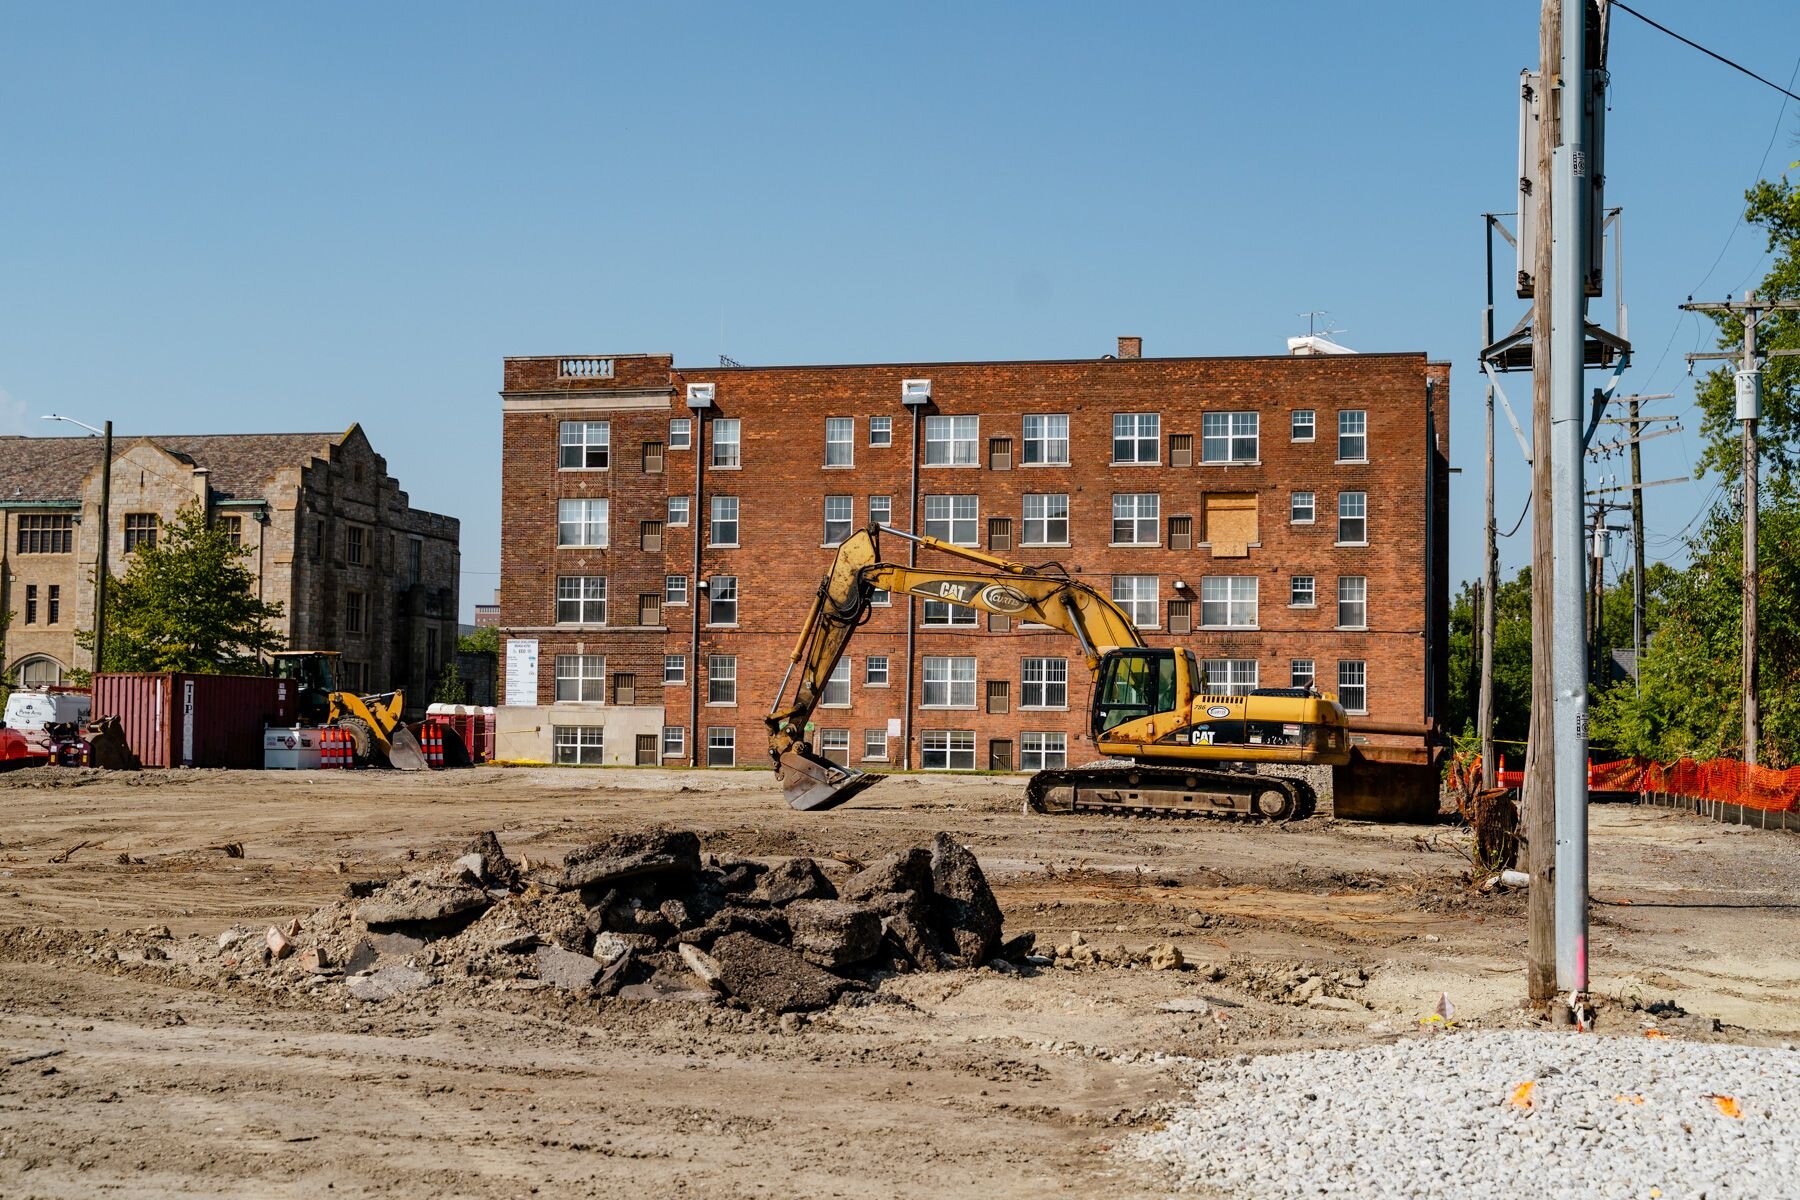 A bulldozer turns dirt at the back of the Marwood apartment building.